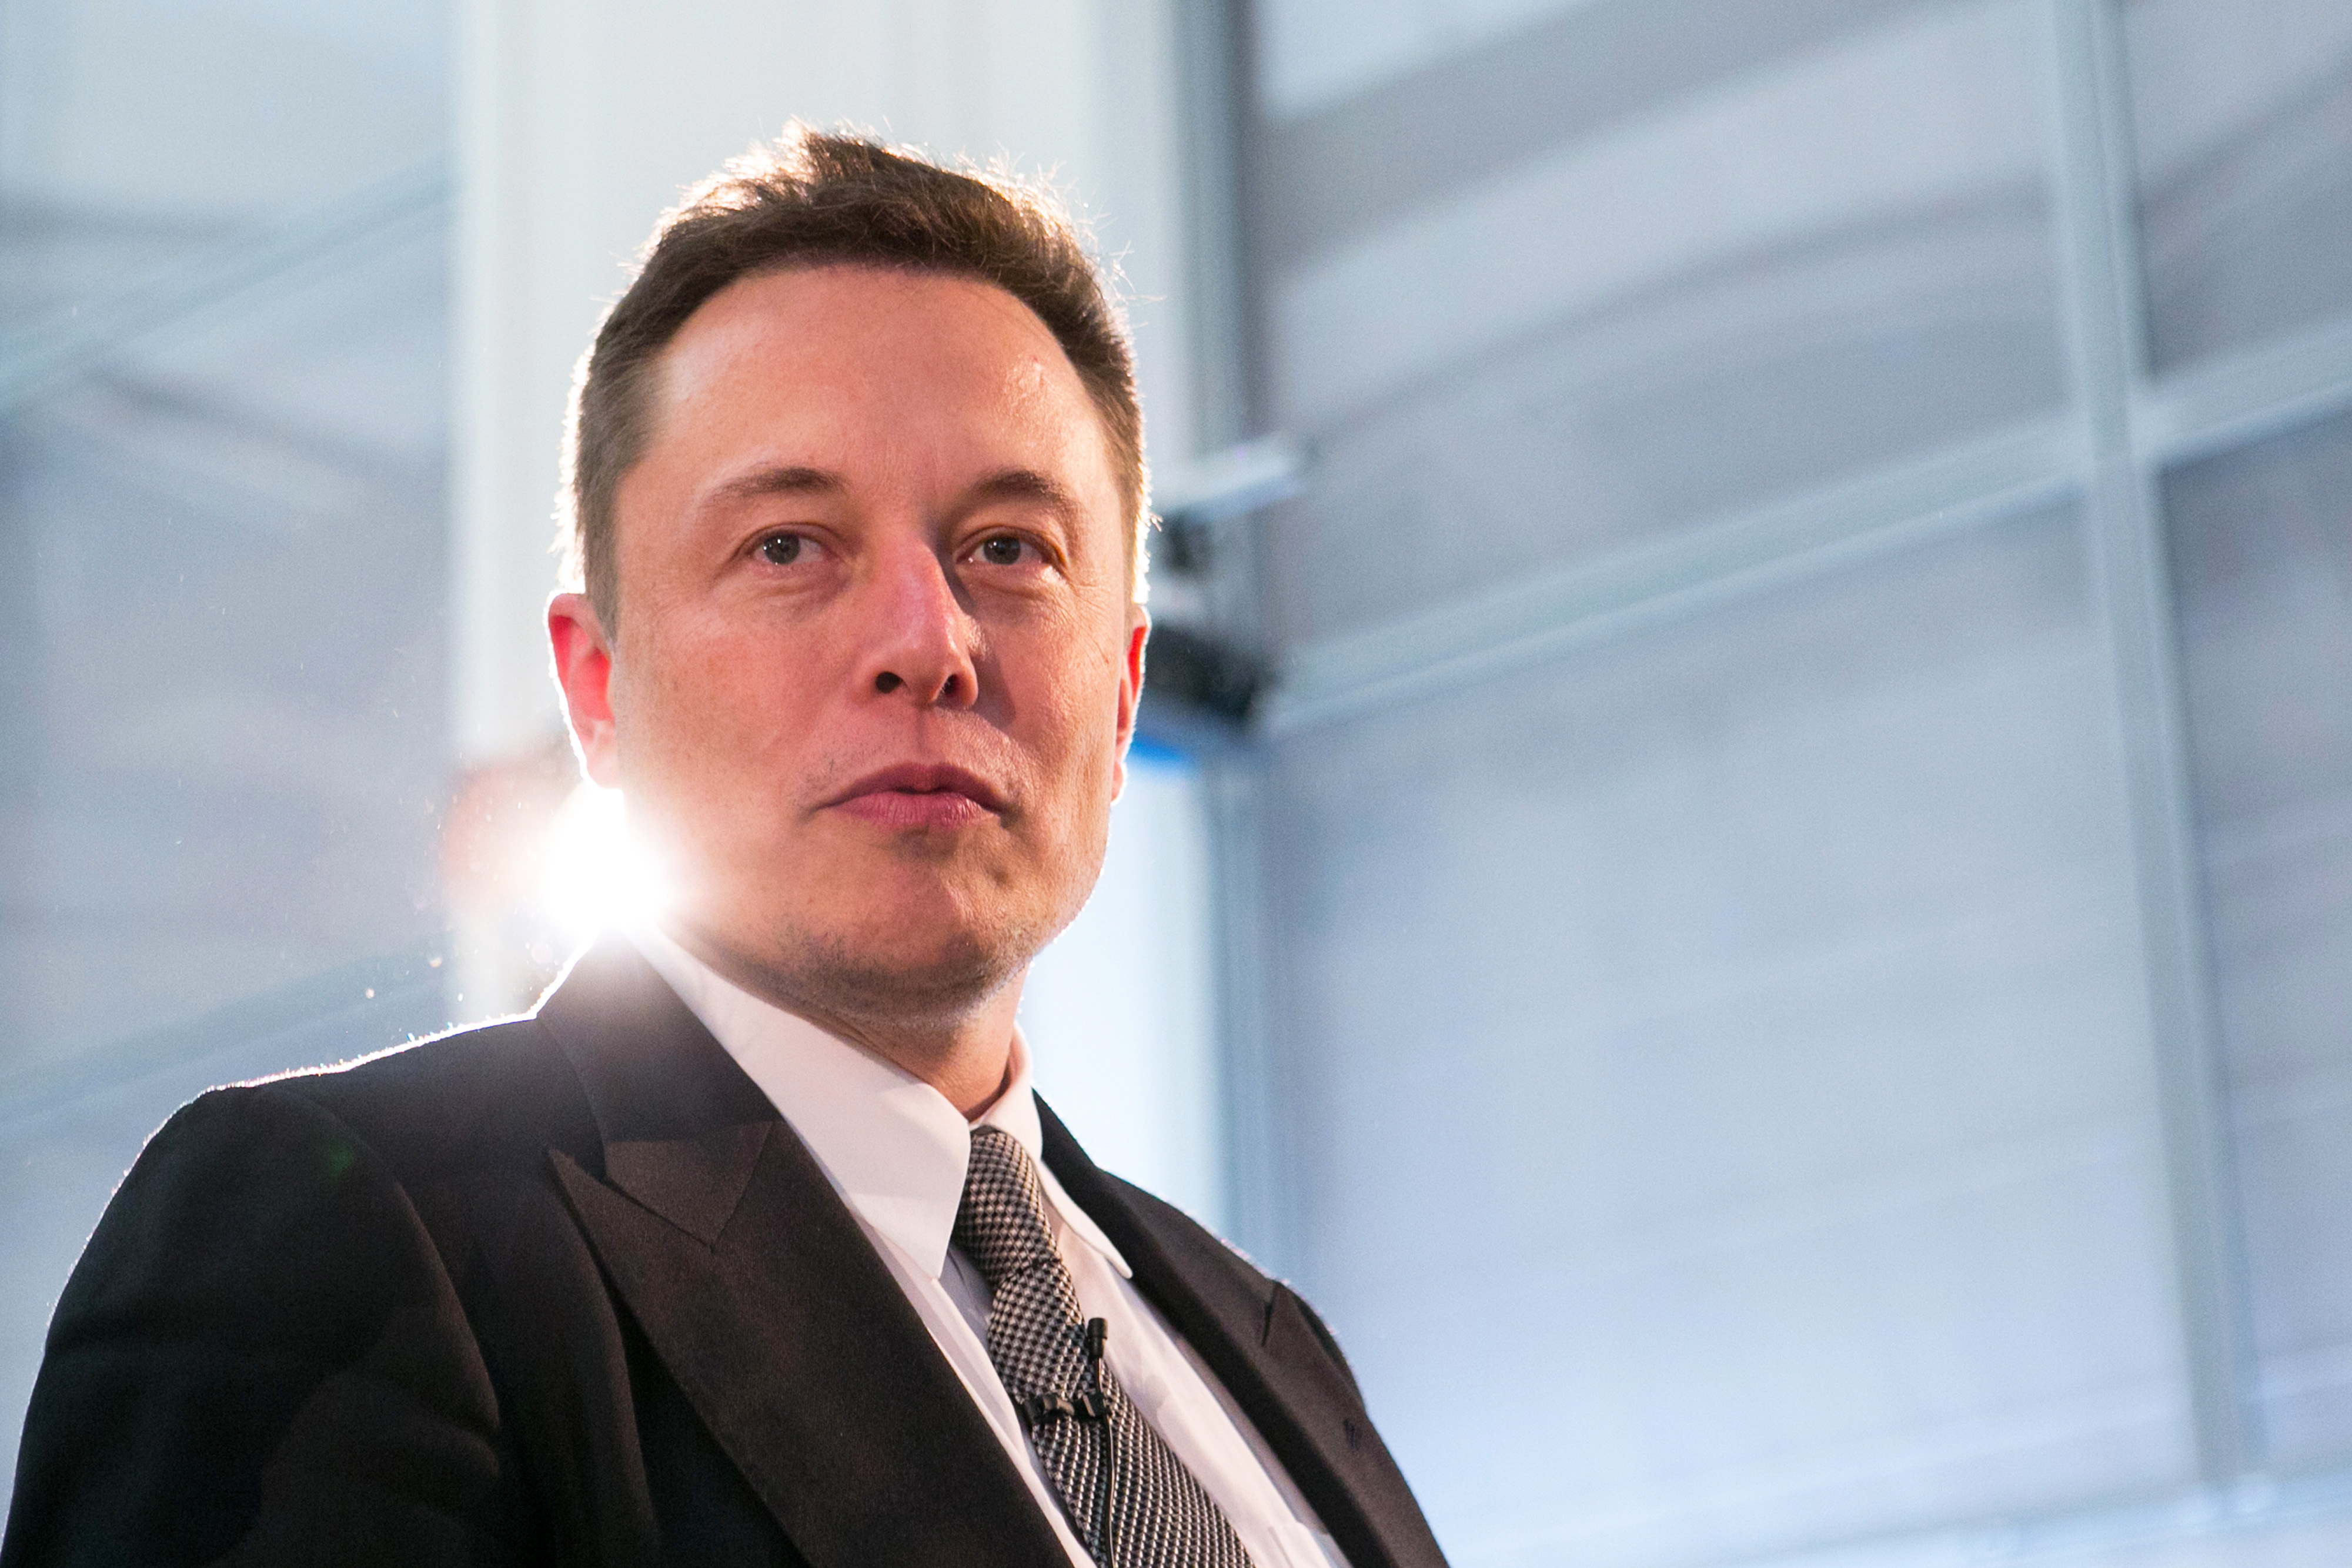 Germany's Economy And Energy Minister Sigmar Gabriel Meets Tesla Motors Inc. Chief Executive Officer Elon Musk